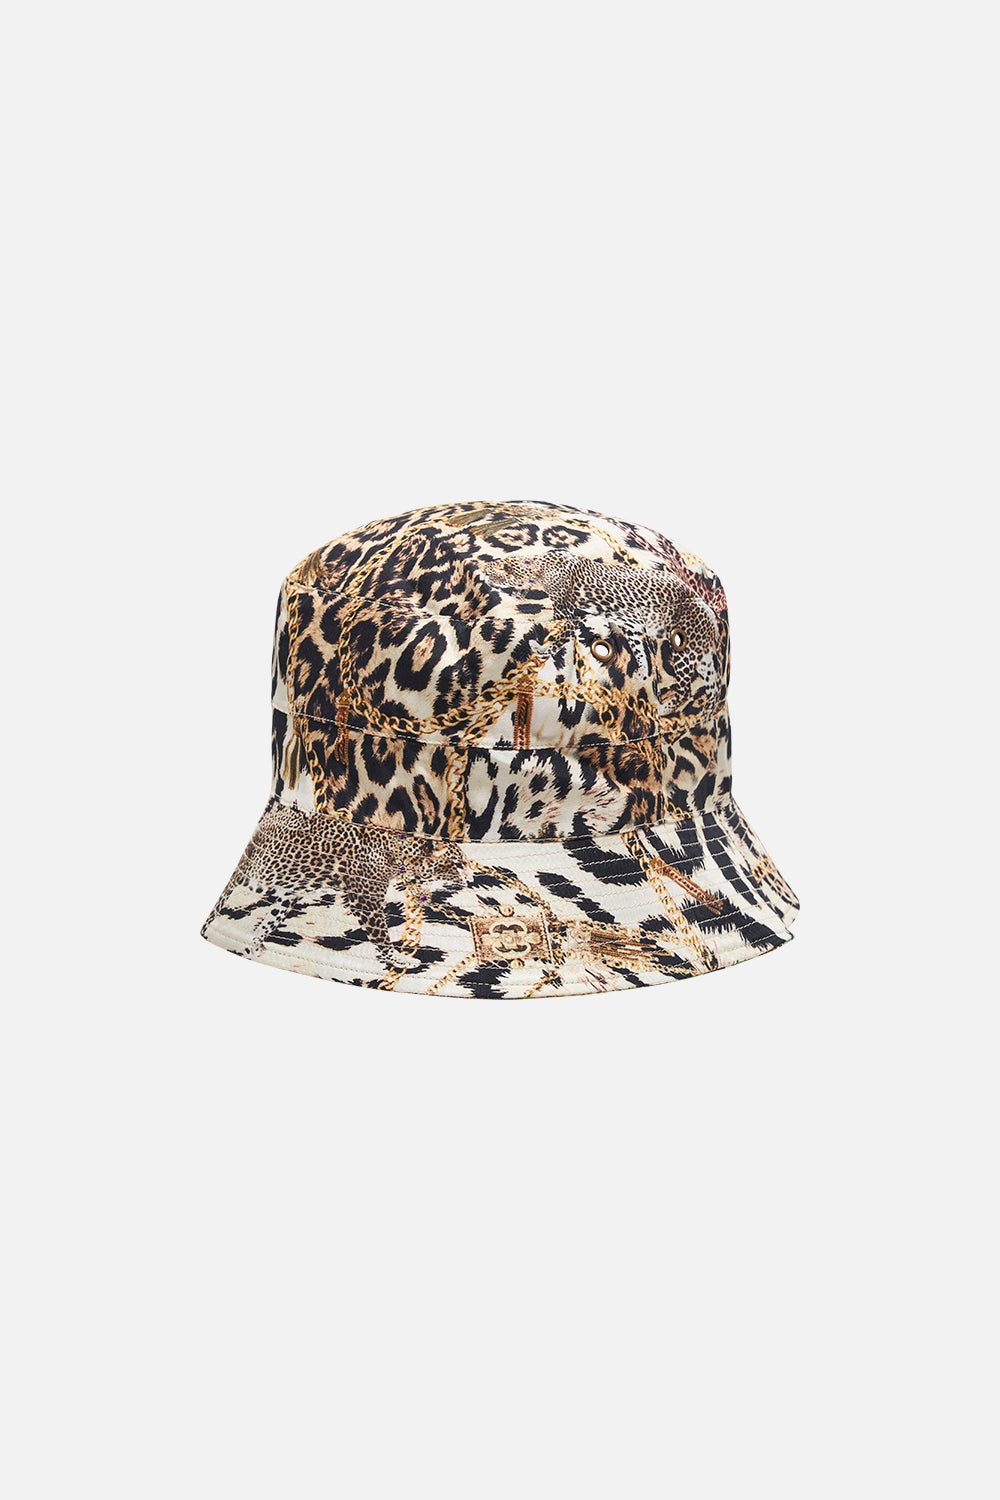 MENS REVERSIBLE BUCKET HAT CURIOUS AND CURIOUSER